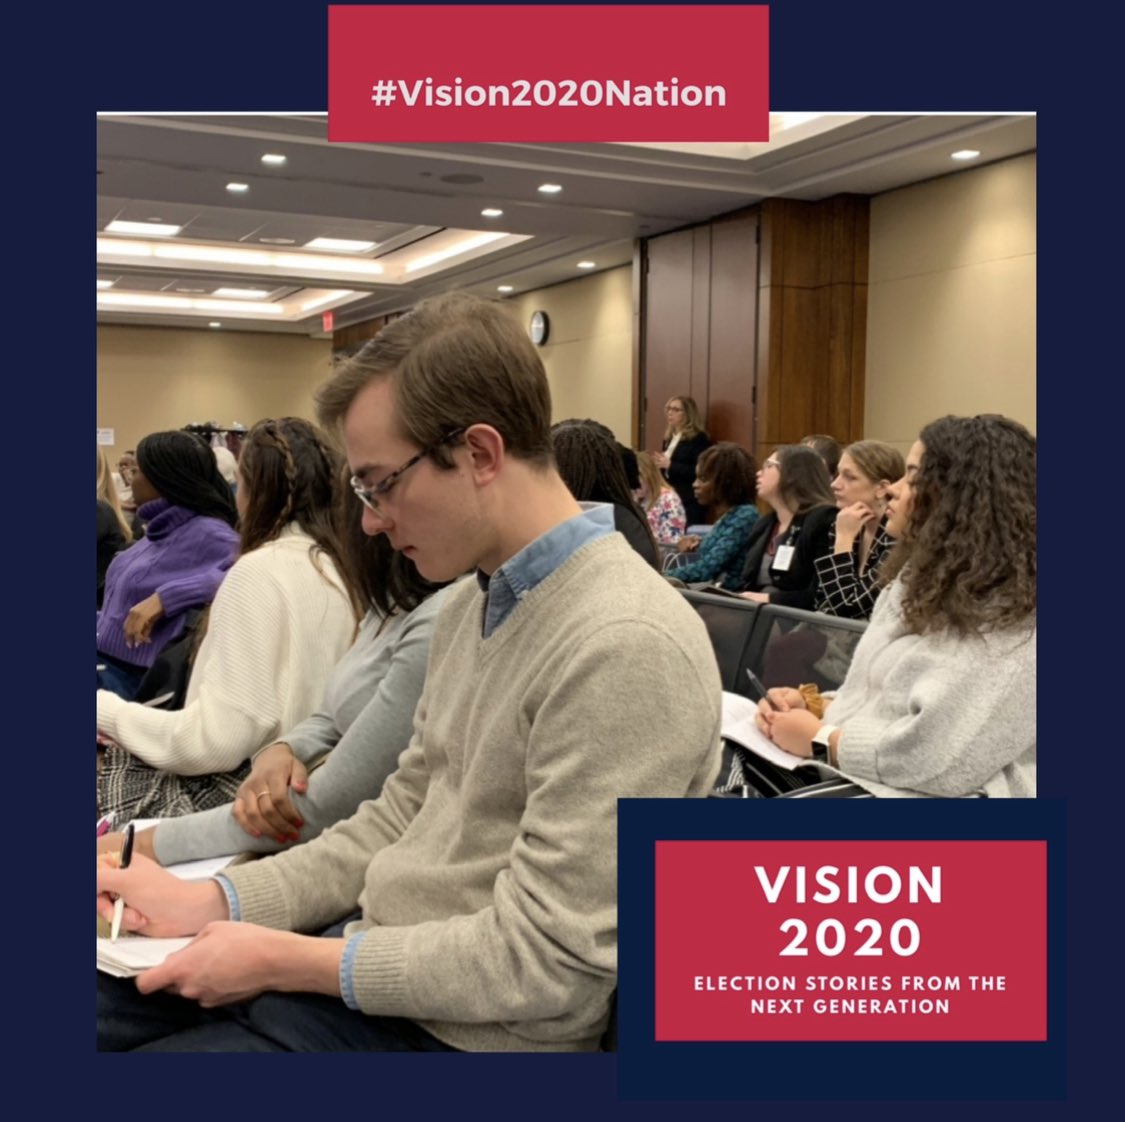 In February we attended the  @NOW Racial Justice Summit & Congressional Briefing @ the House so that students could learn about policy drafted to address racial disparities  #Election2020    #Vision2020Nation  @AU_SOC  @AmericanU  @thenation https://issuu.com/sherriwilliams7/docs/vision2020doc